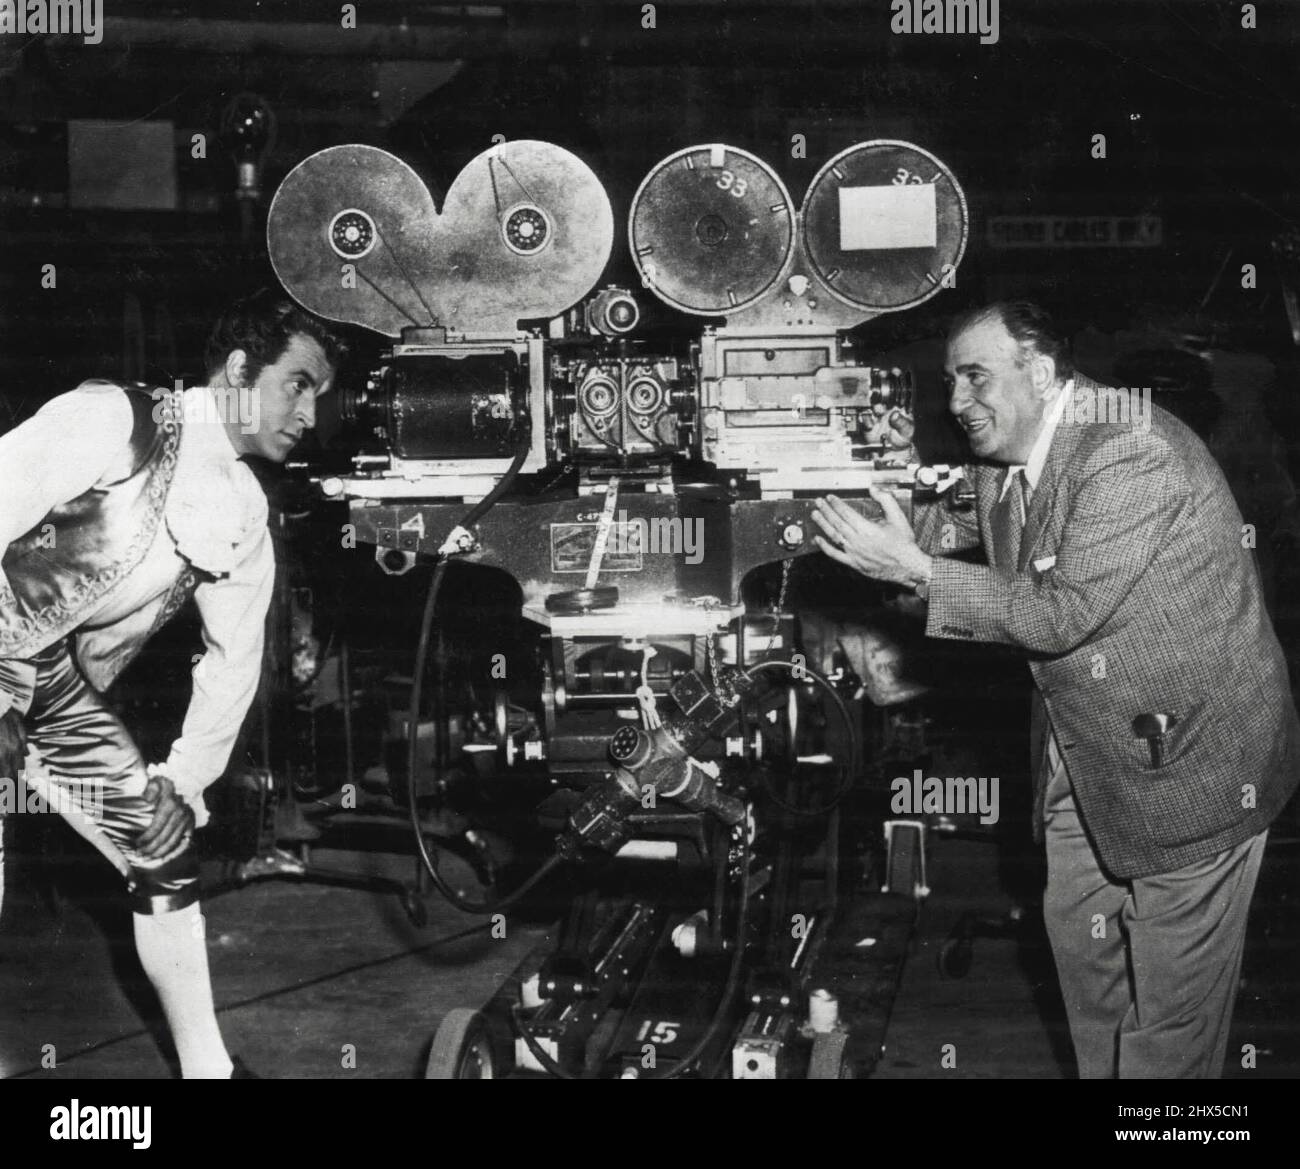 New - Dimensional Revolution Hits Hollywood - The swift rise of television in public favor has forced the movie industry into a revolution as sweeping as the advent of sound 25 years ago--the production of films with three-dimensional effects. Here Actor Fernando Lamas and Director Edward Ludwig inspect the three-dimensional cameras being used to photograph 'Sangaree' in Paramount's new 3-D process cal led Paravision. Special glasses are needed to view the finished product. February 9, 1953. (Photo by AP Wirephoto). Stock Photo